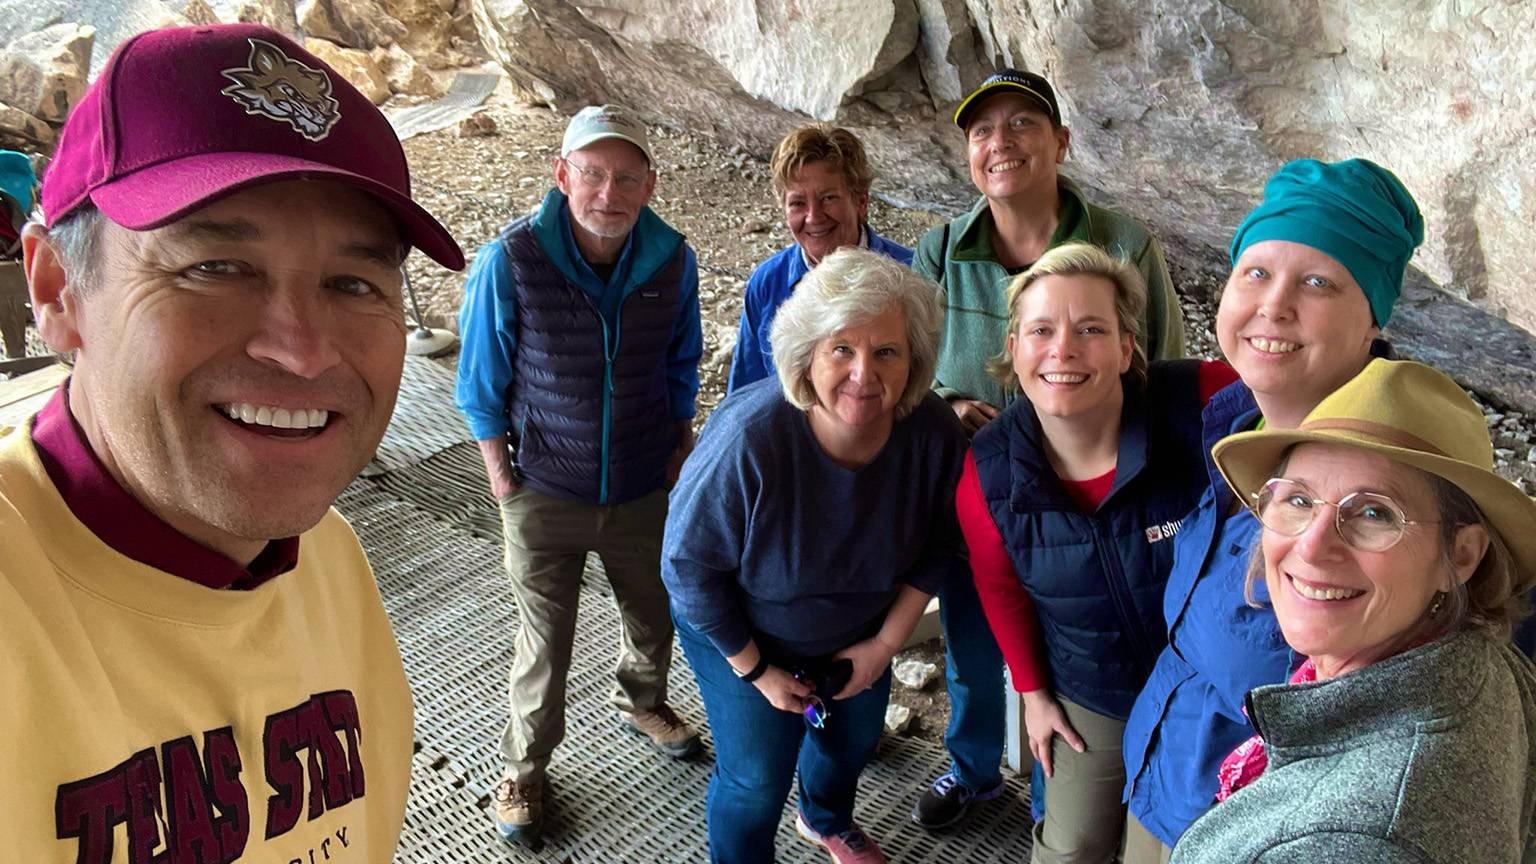 President Kelly Damphousse, left, poses for a photo with a group of staff and faculty during their hike to see rock art.